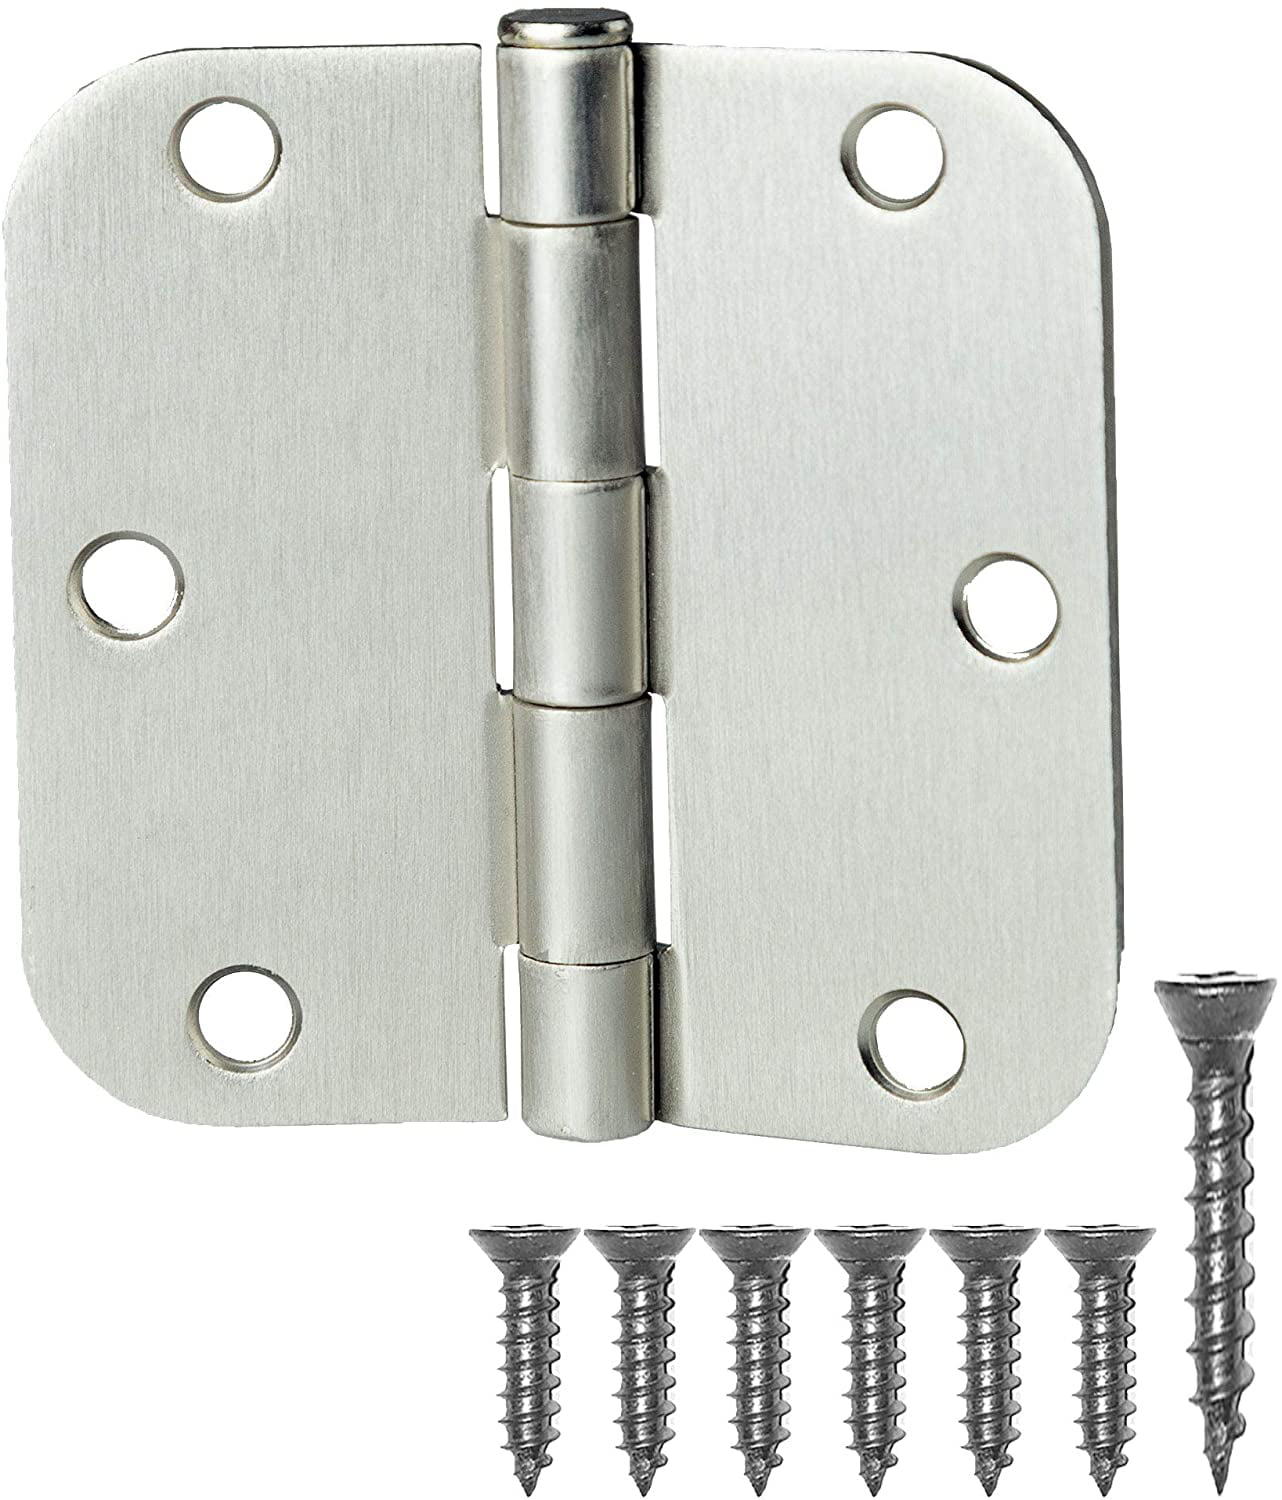 8" Weighty Scotch Stainless Steel Tee Hinges 